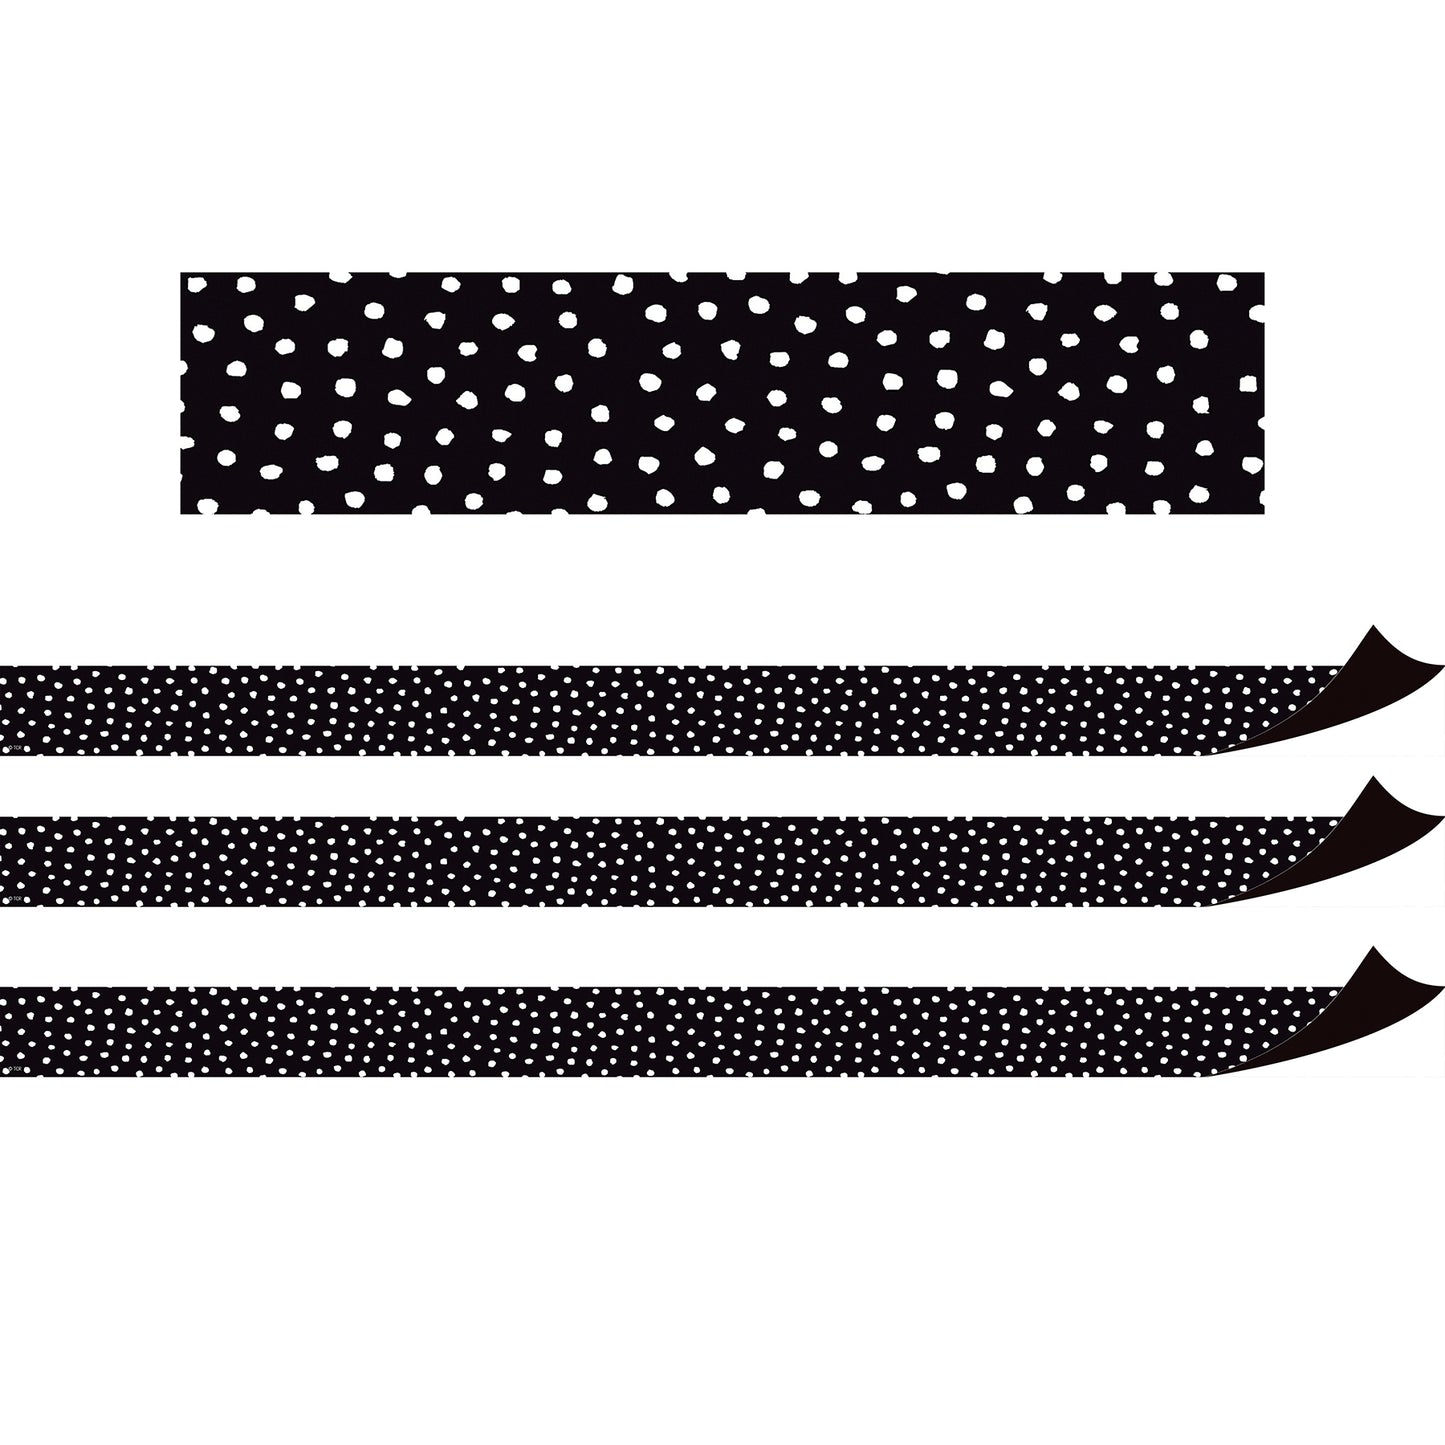 Black with White Painted Dots Magnetic Border, 24 Feet Per Pack, 3 Packs